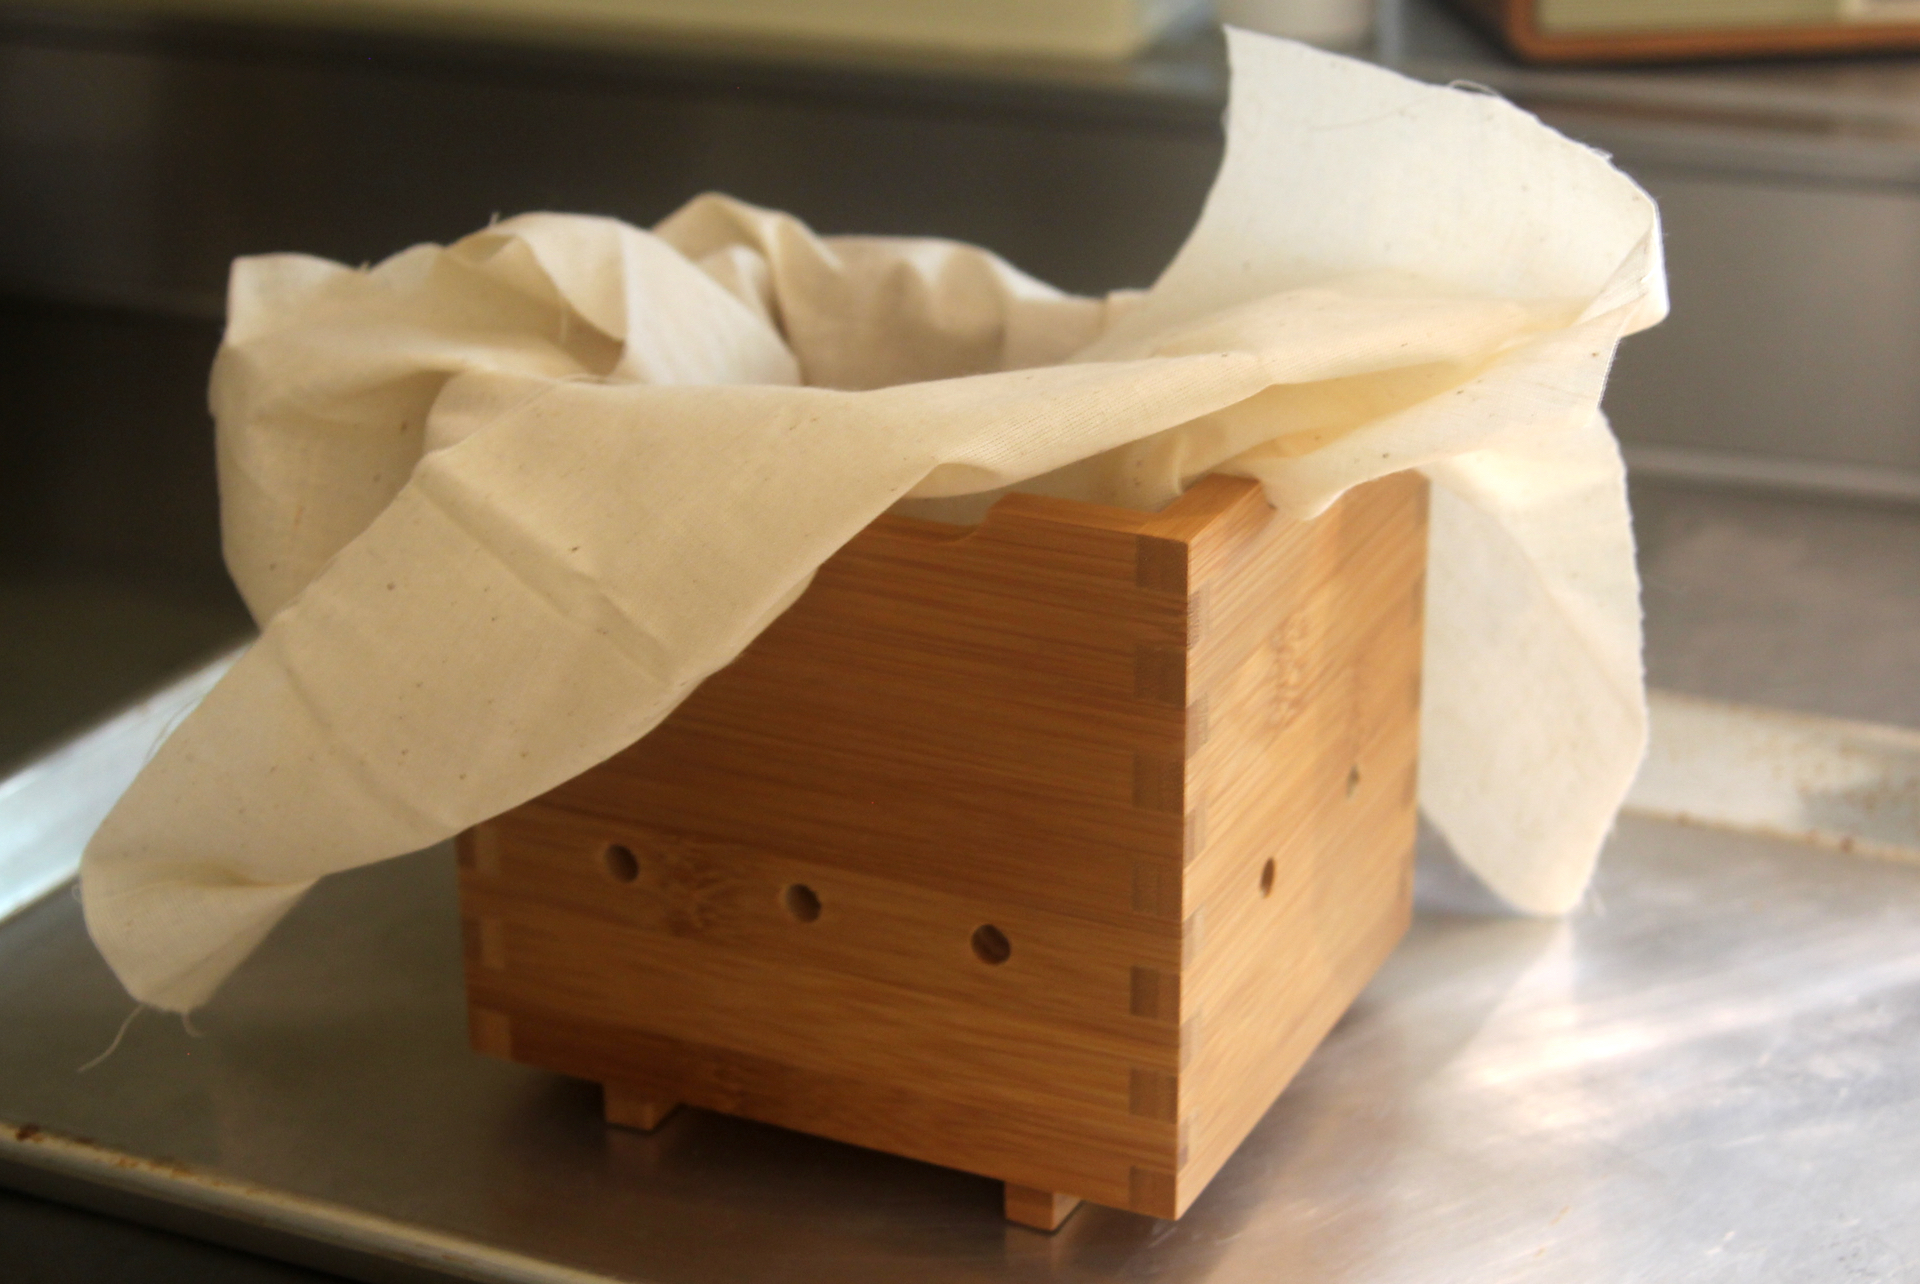 A wooden tofu mold with butter muslin.